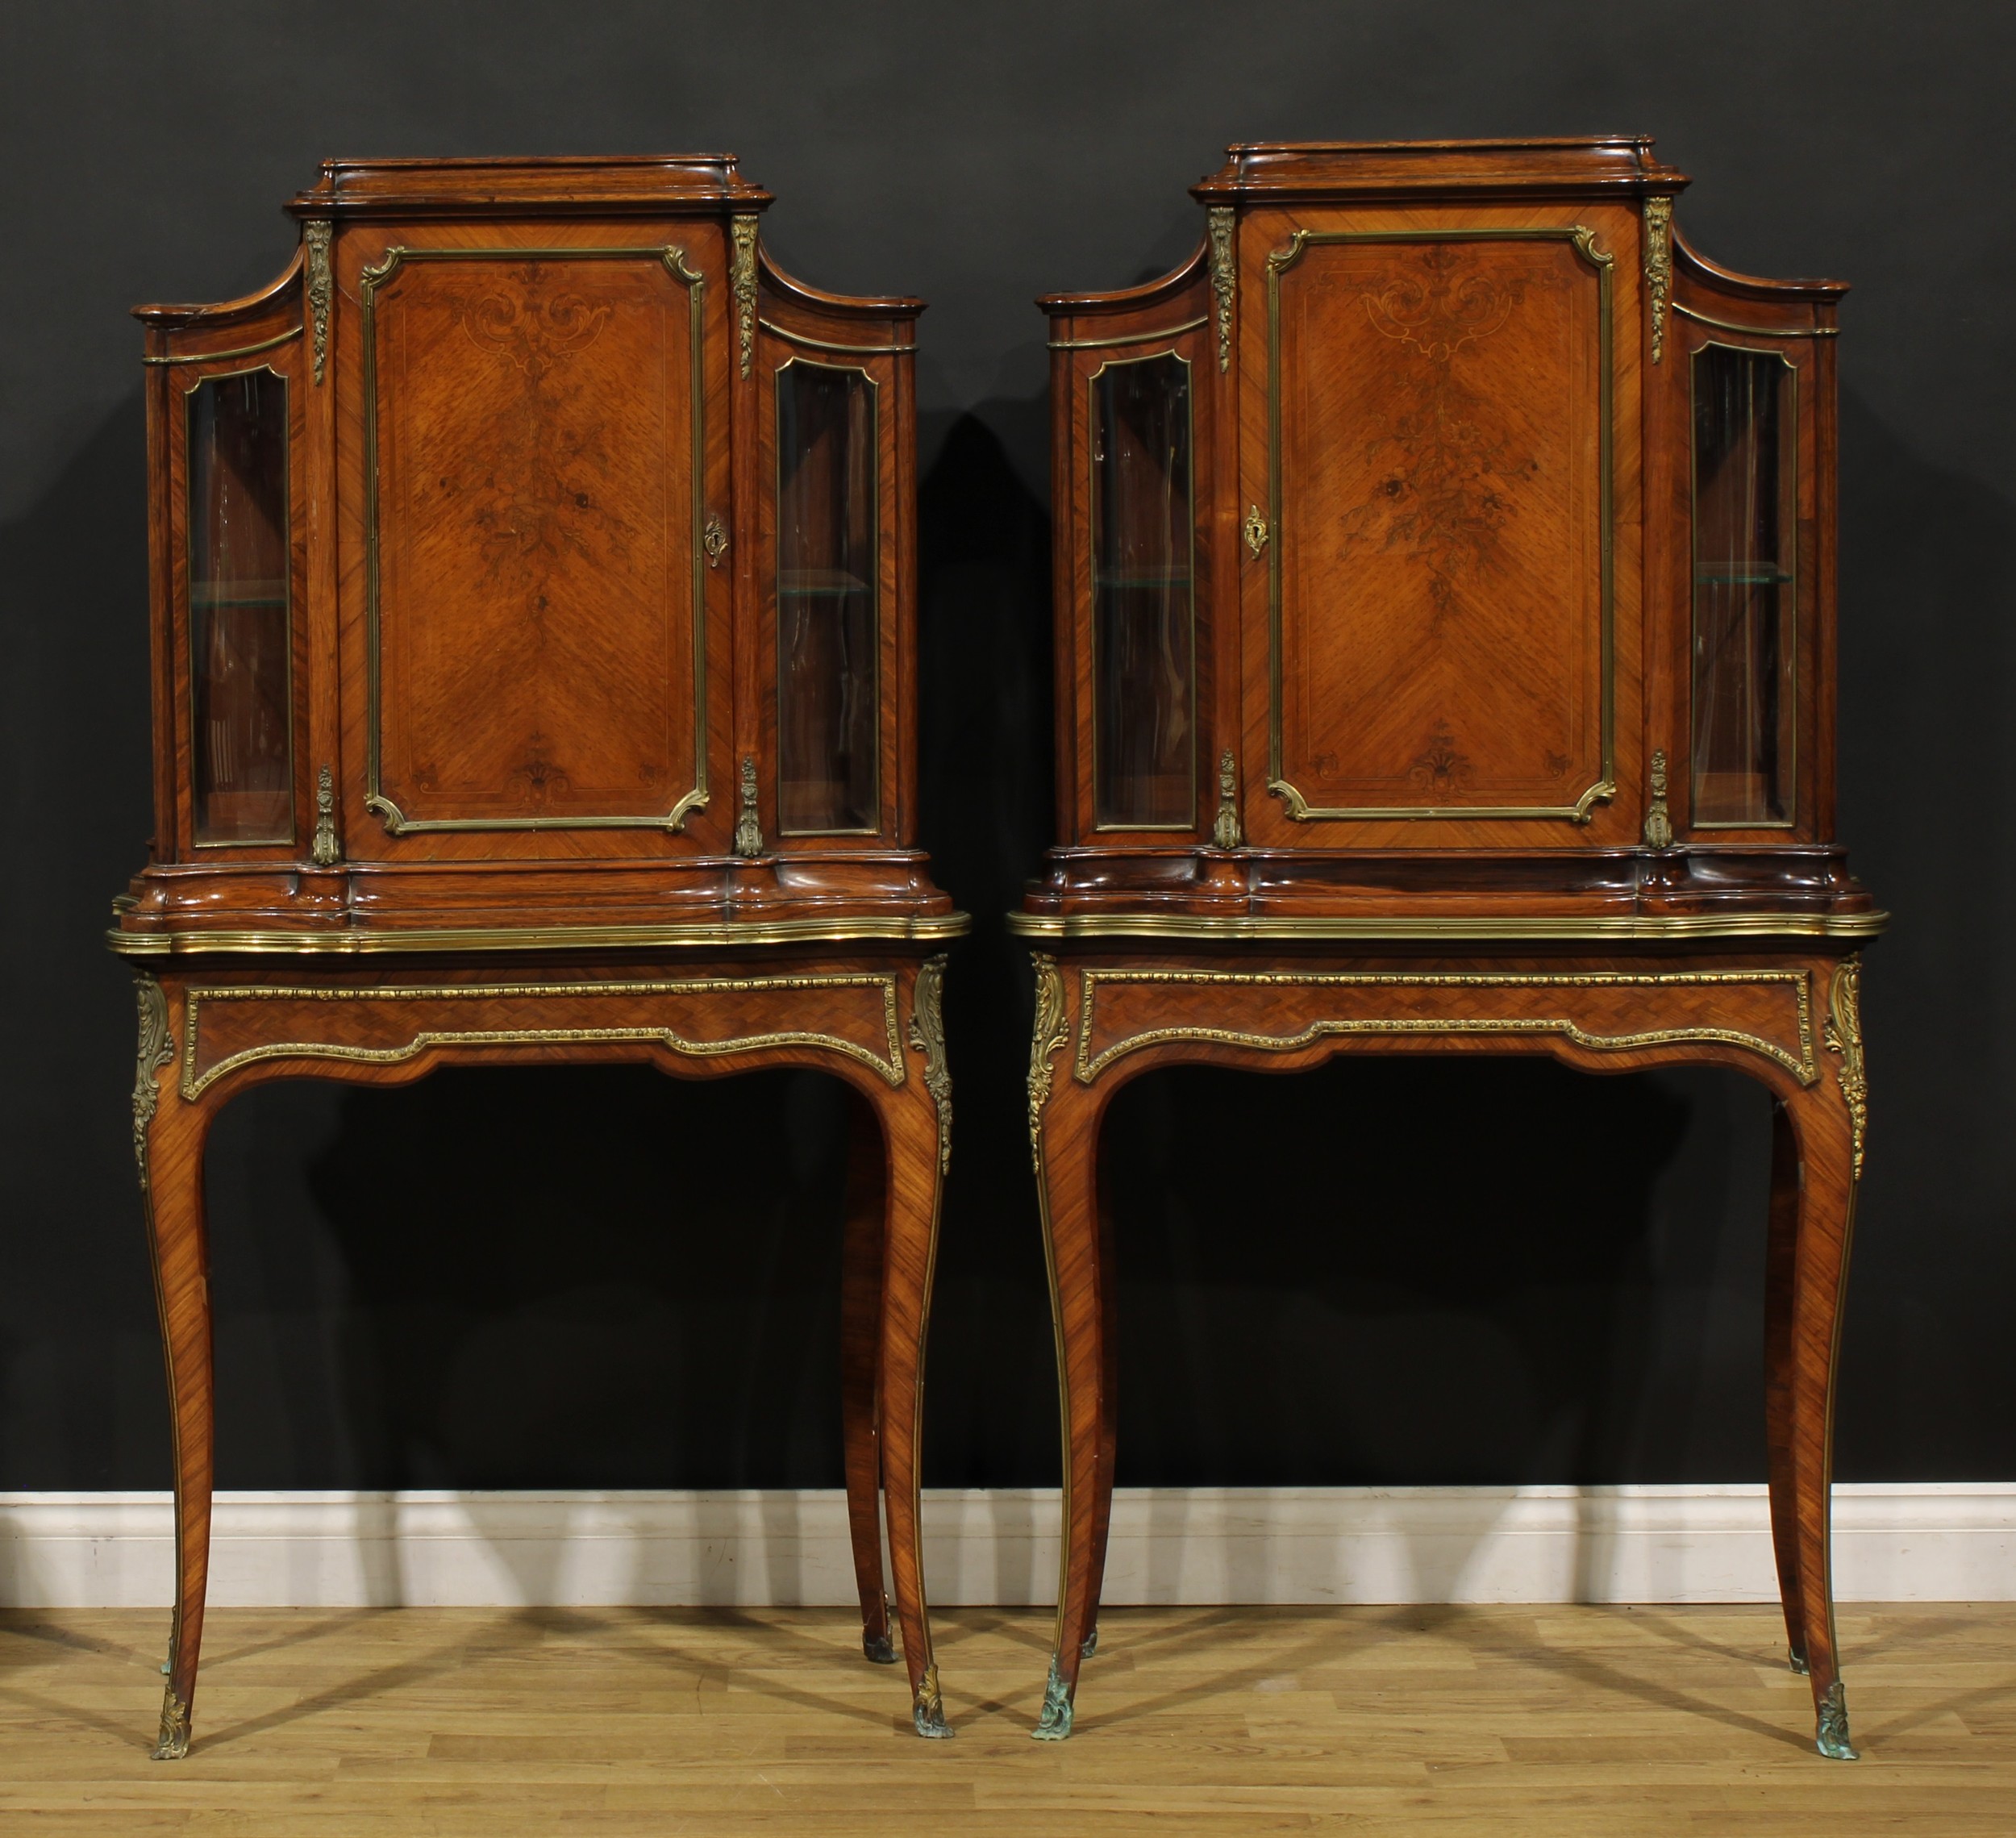 A pair of late 19th century Franglais gilt metal mounted rosewood, kingwood and marquetry pier